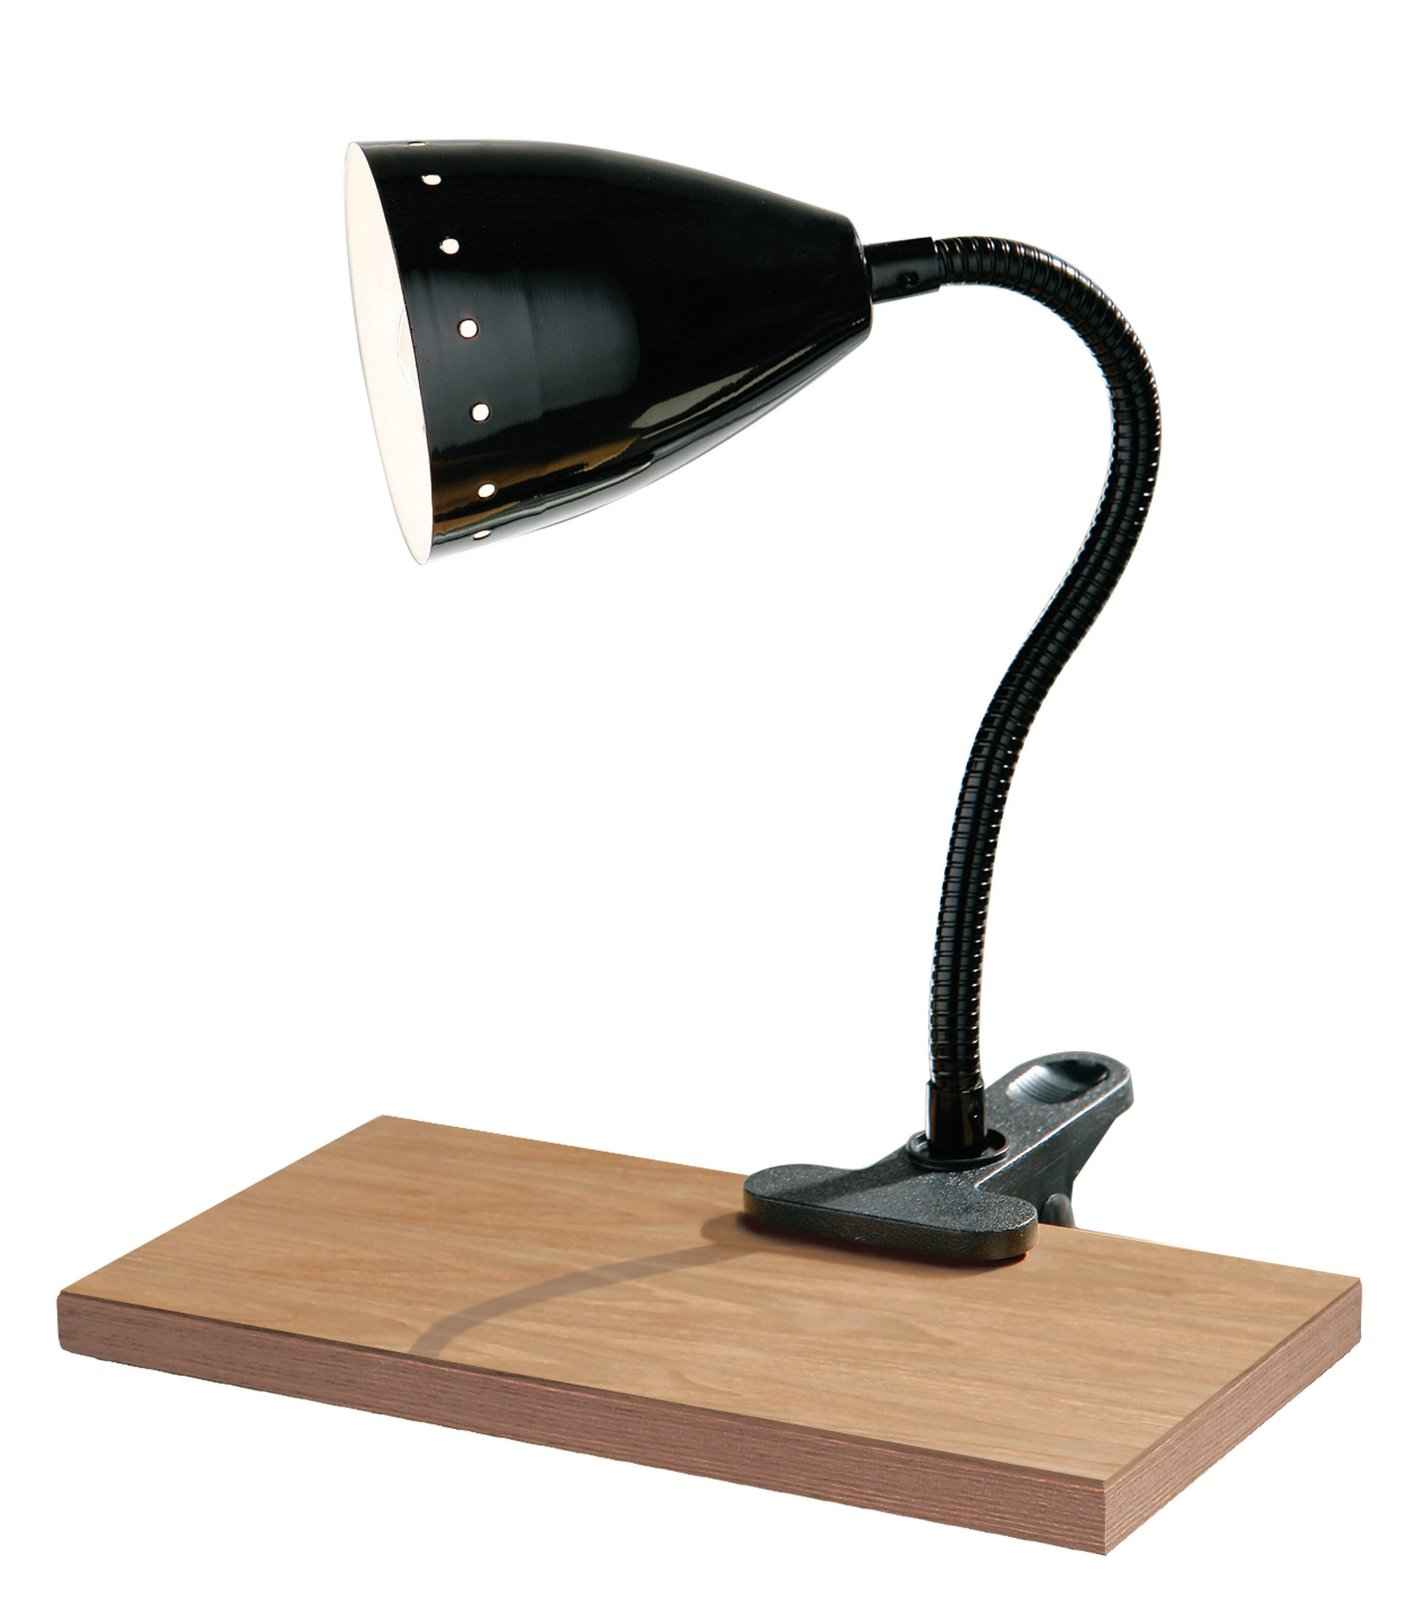 Wooden Best Table Lamps For Office with Wall Mounted Monitor